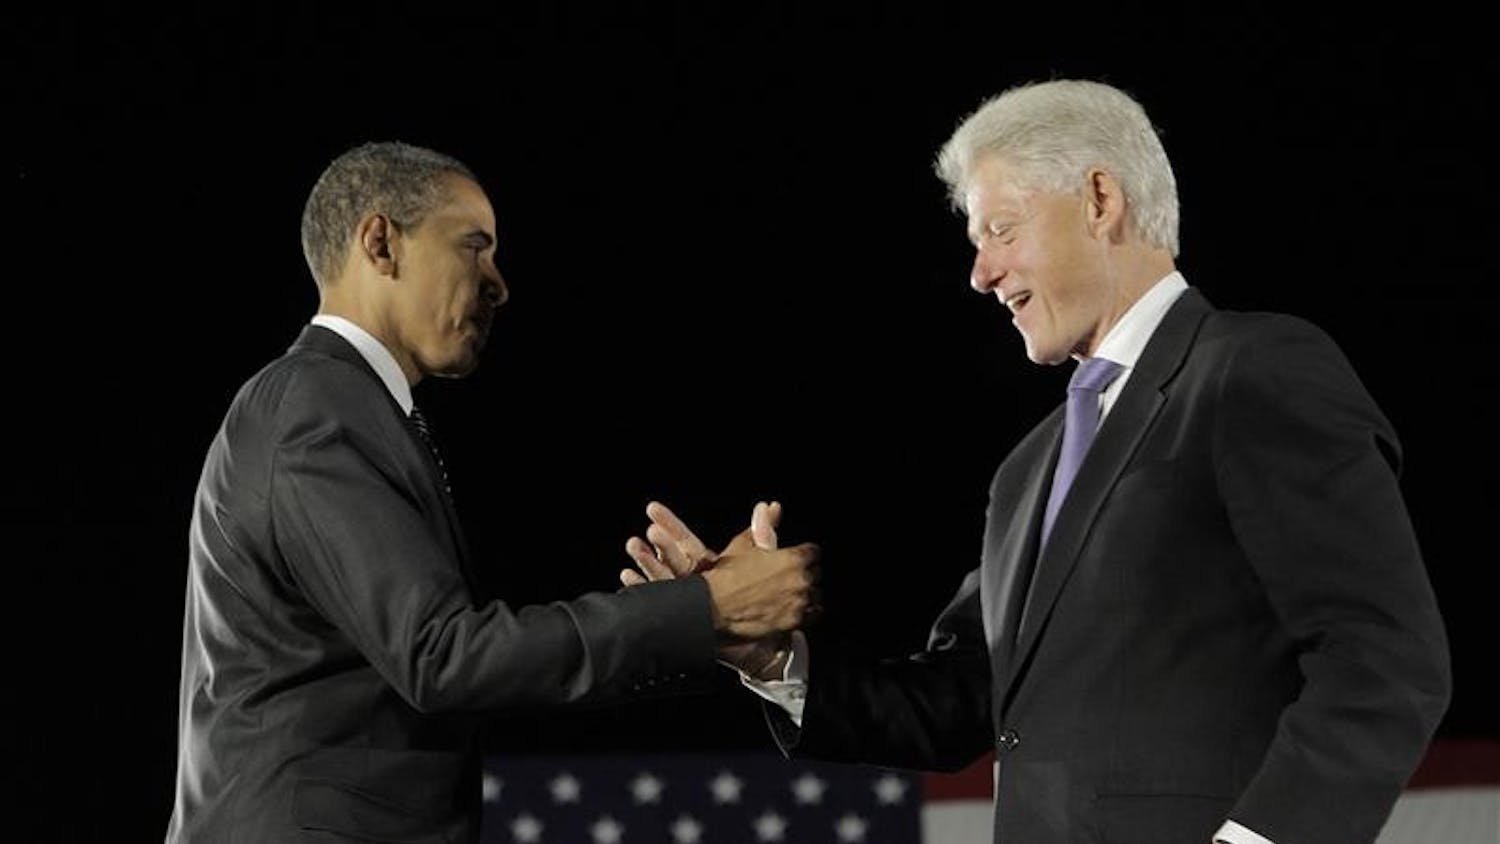 Democratic presidential candidate Sen. Barack Obama, D-Ill., left, shakes hands with former President Bill Clinton after addressing supporters on Wednesday at a rally in Kissimmee, Fla.